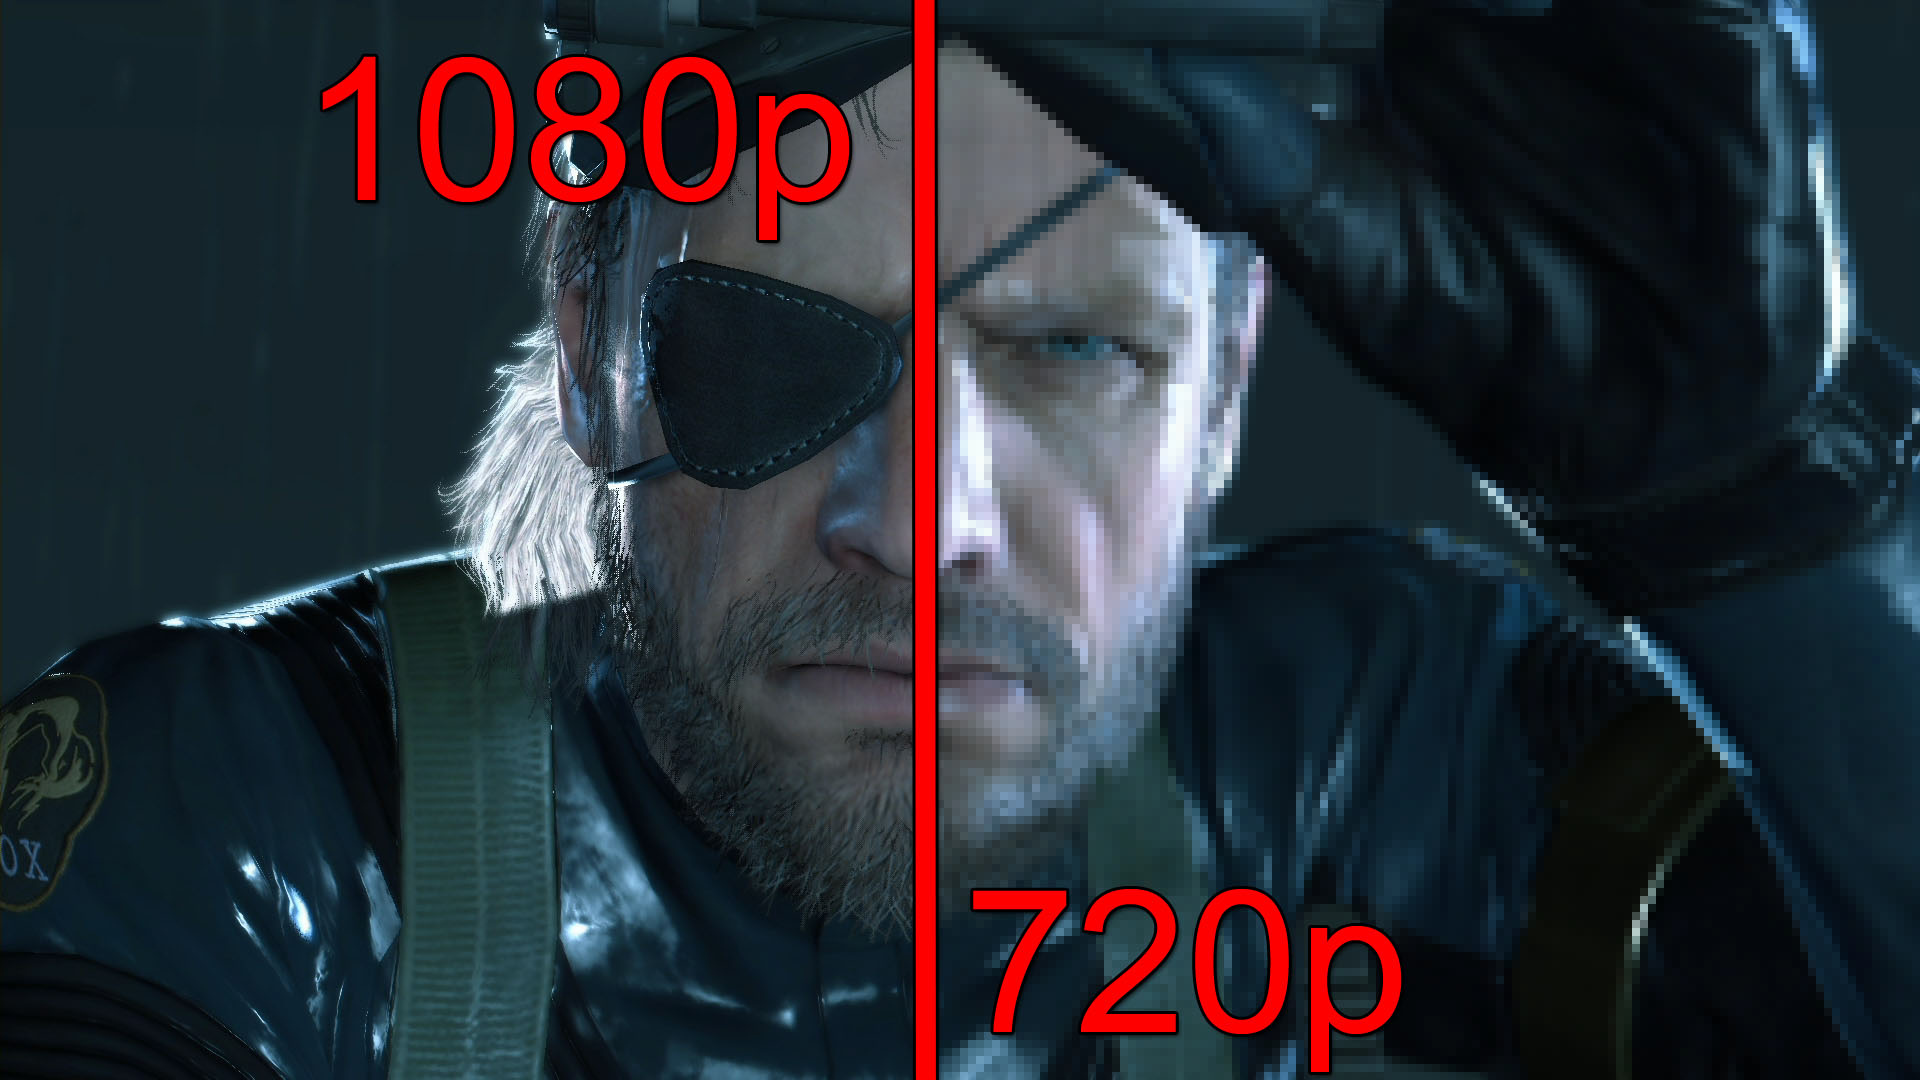 Metal Gear Solid V 1080p vs 720p Screenshot Comparison Will the Old